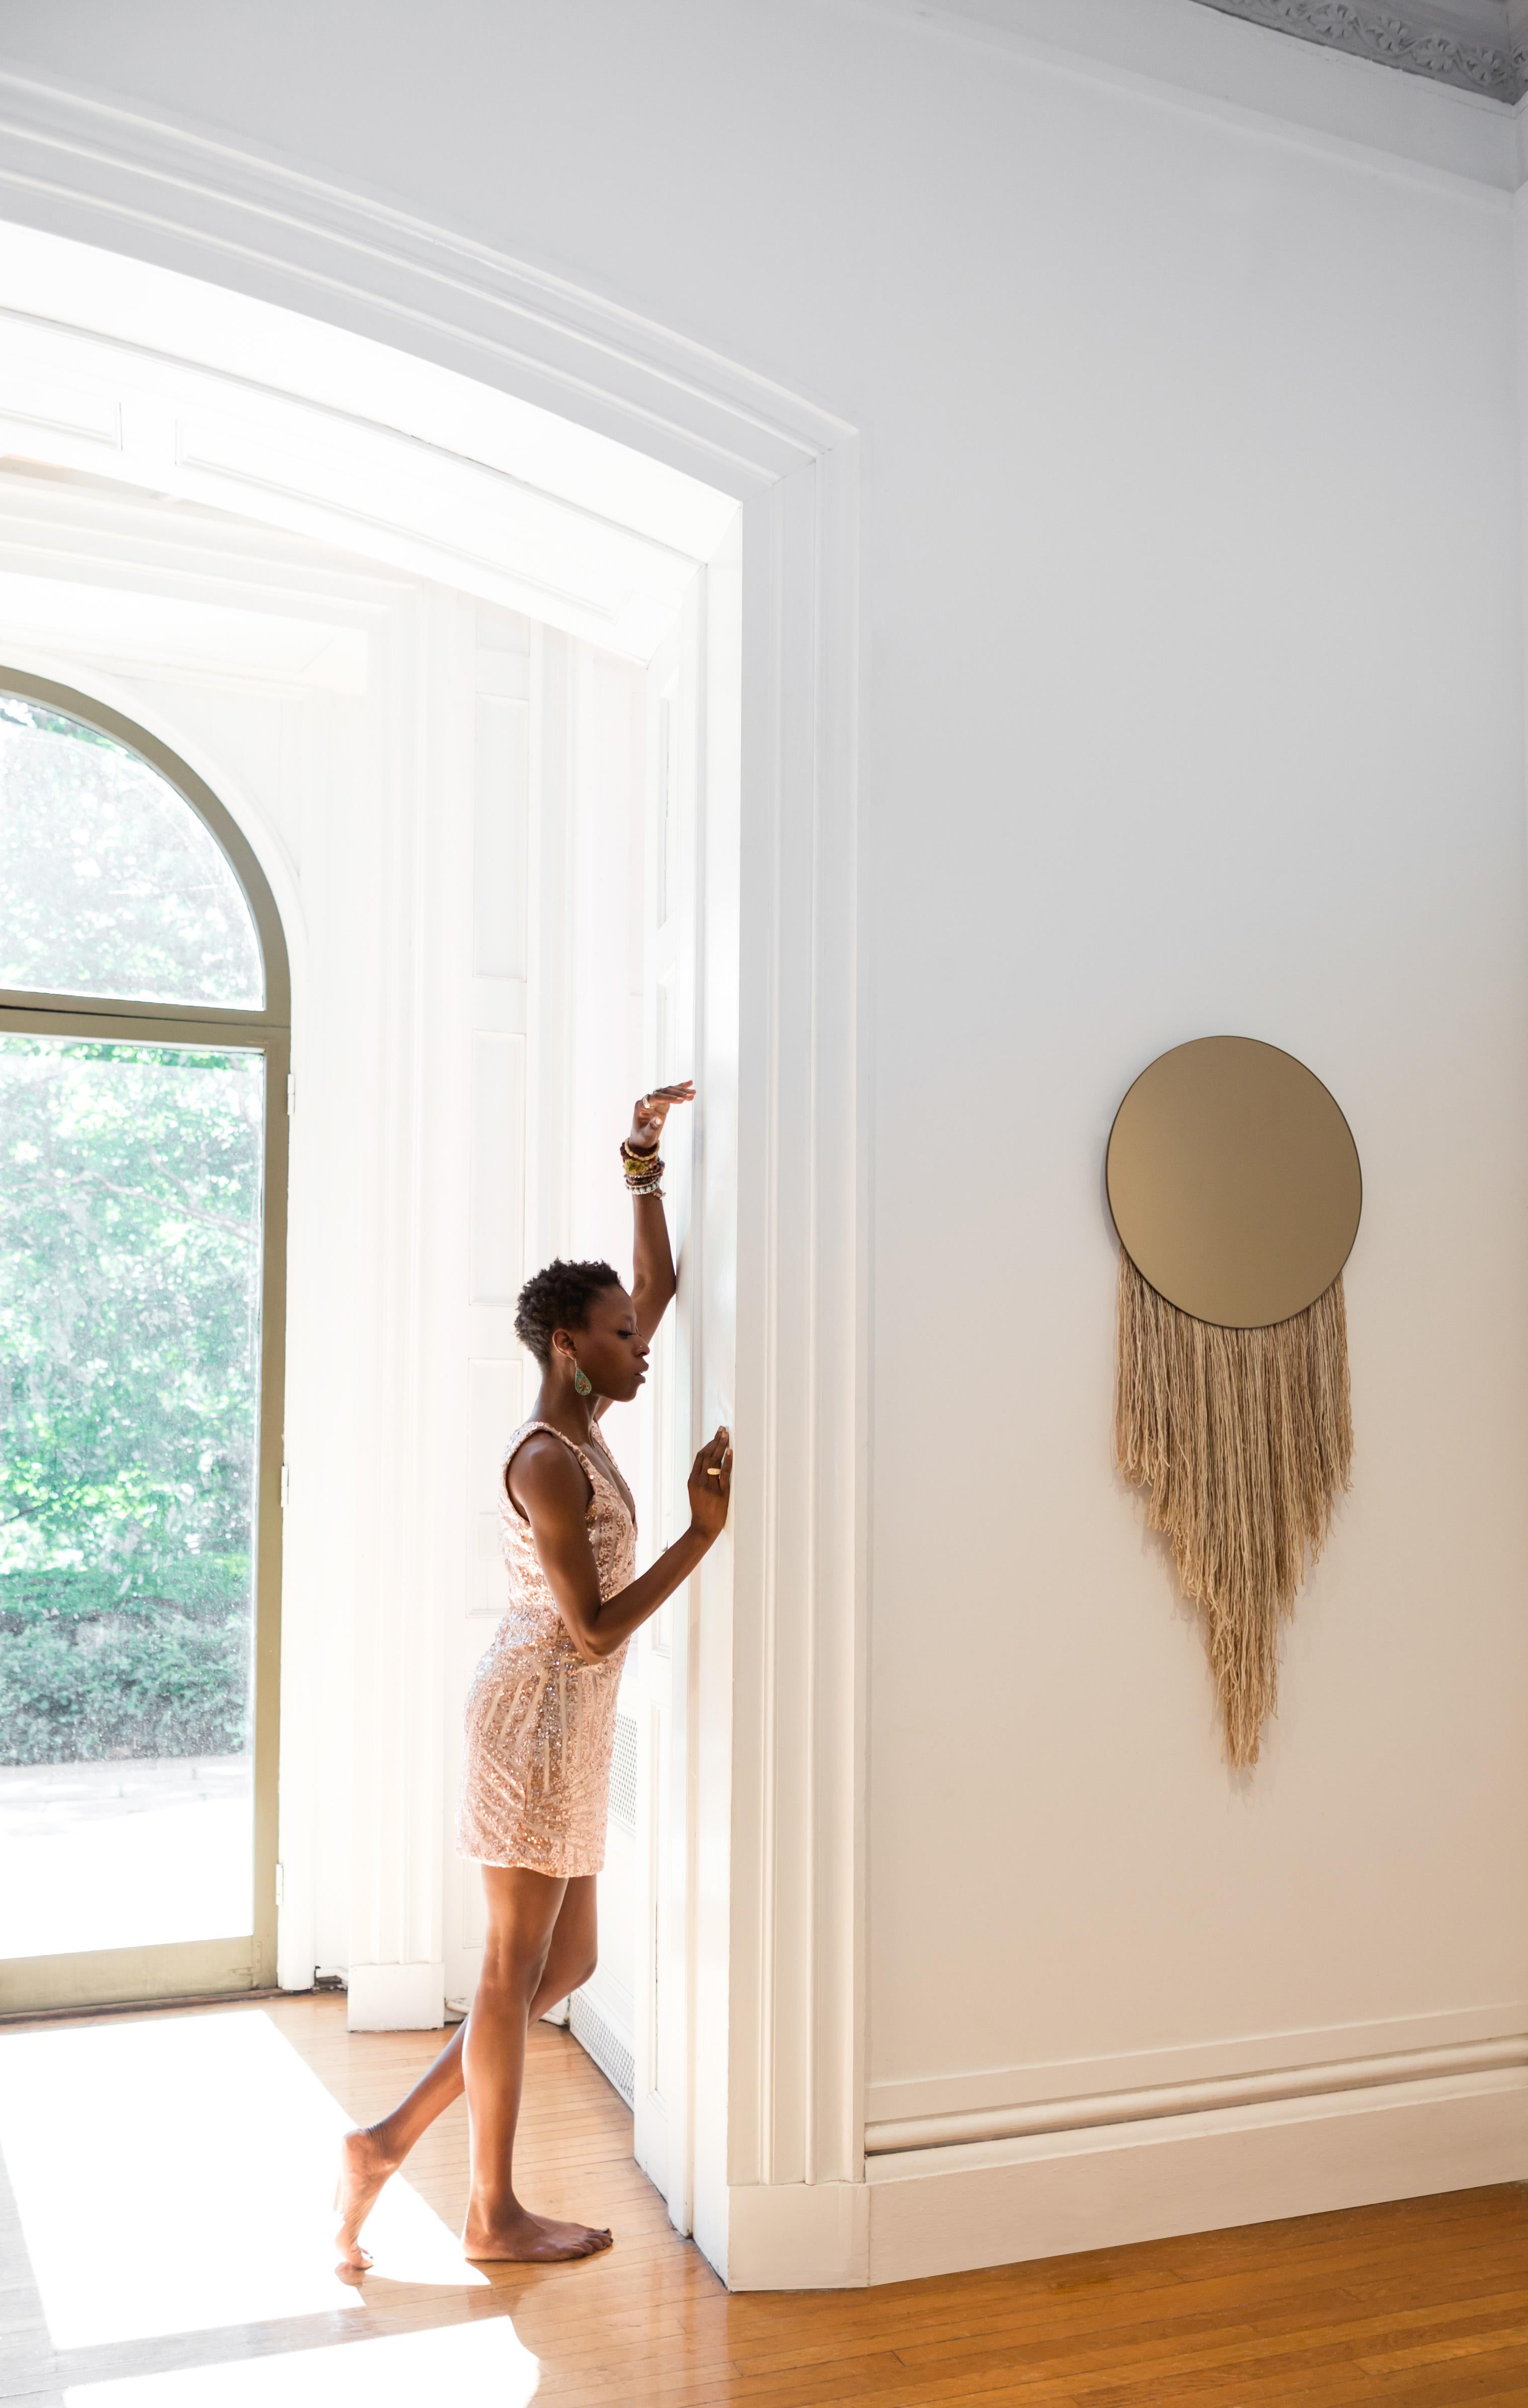 Named after the ancient Greek goddess of Dawn, the Eos mirror explores the relationship between the functional and nonfunctional elements of objects, including the utility of a mirror with the warmth and joie de vivre of fiber.

Customization in